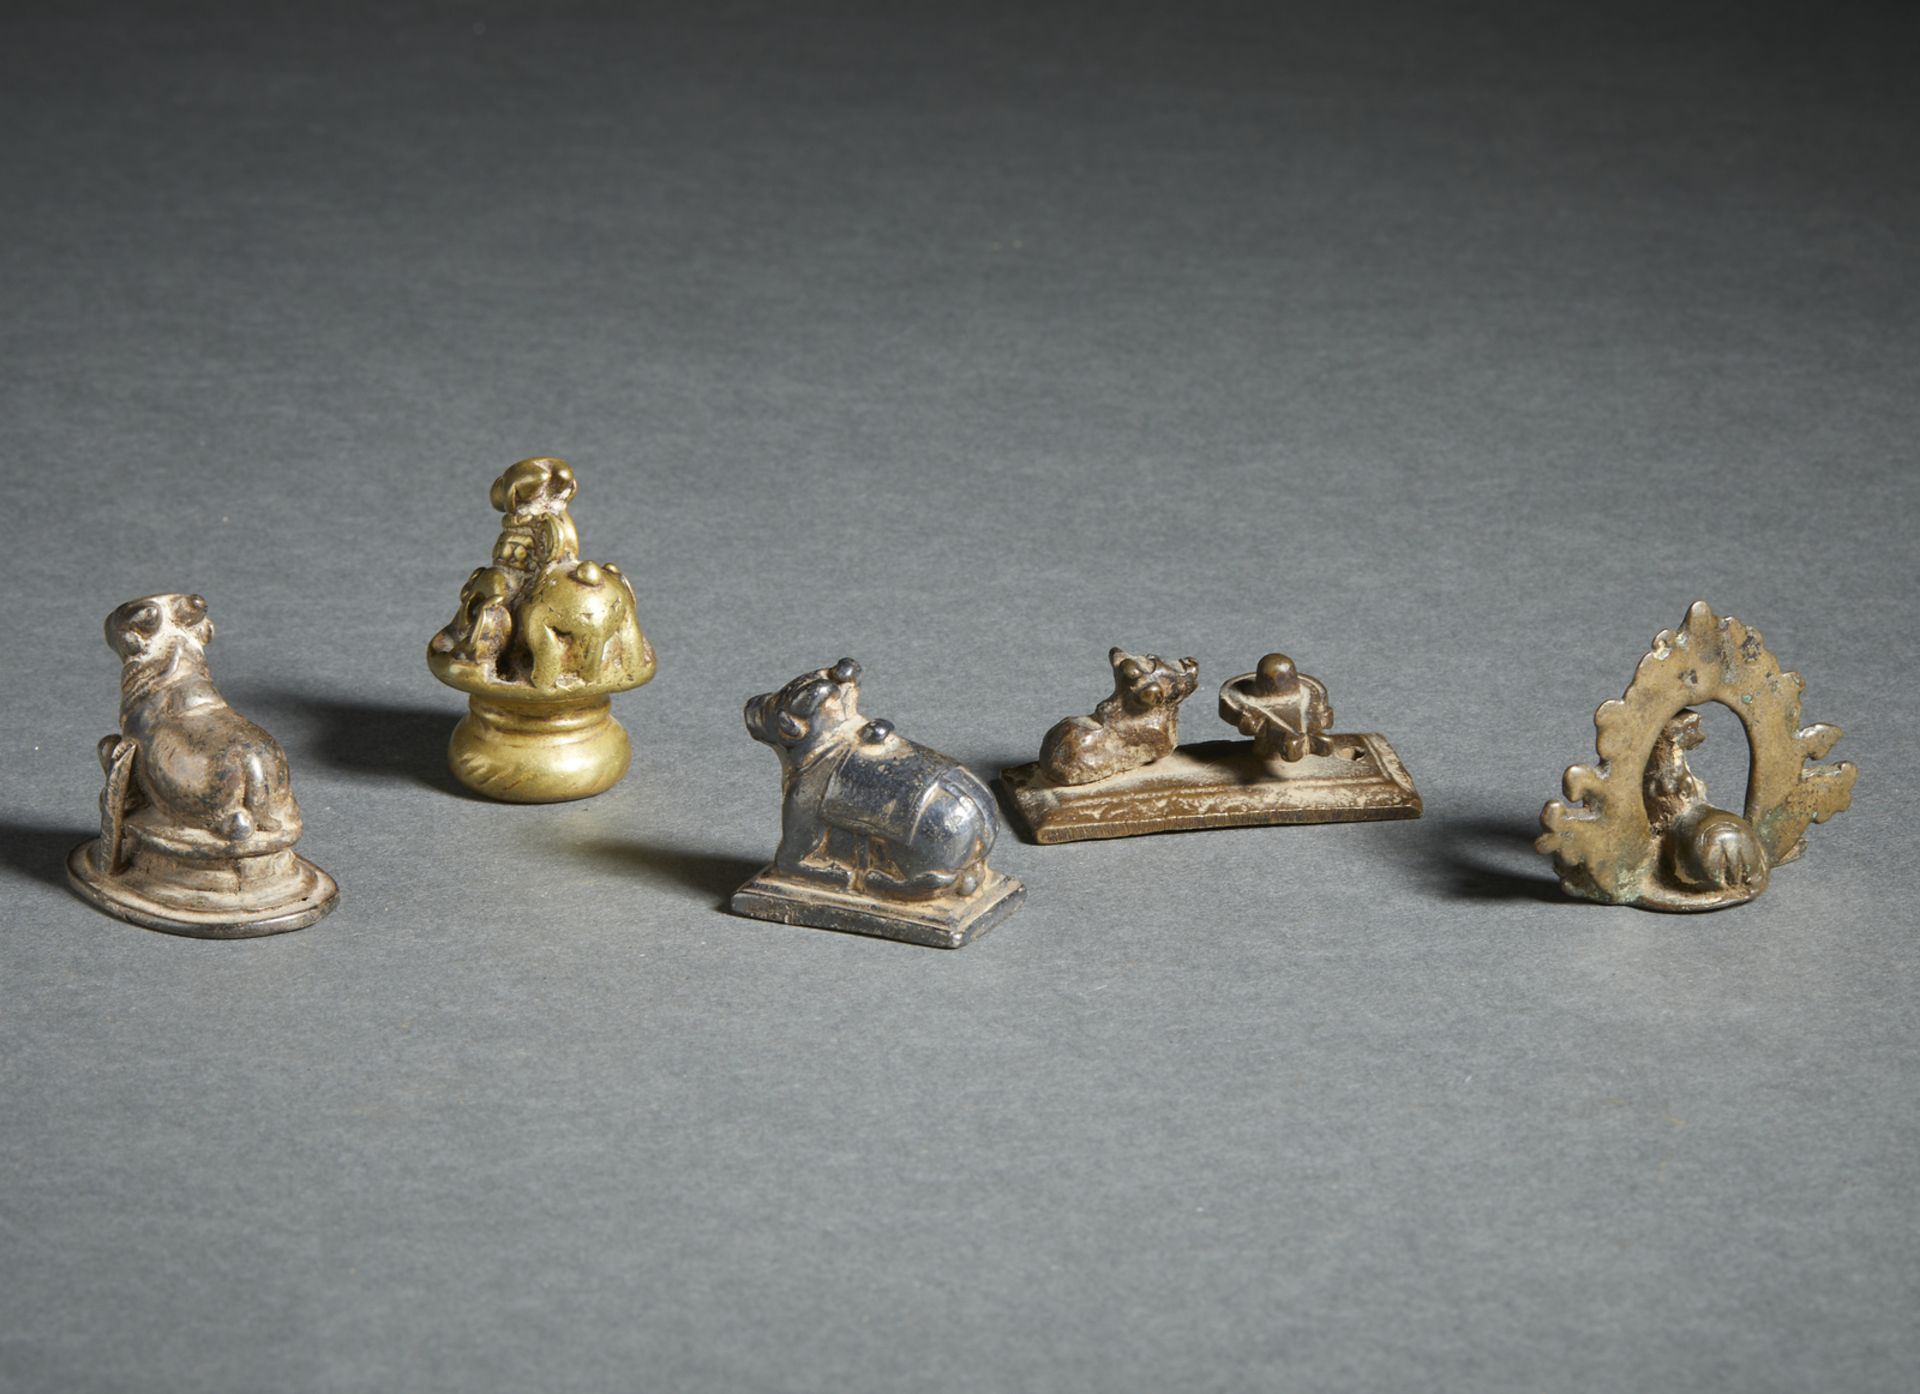 A group of 5 copper alloy figures of recumbent Nandi Central and Southern India, 18th-19th century - Image 2 of 2